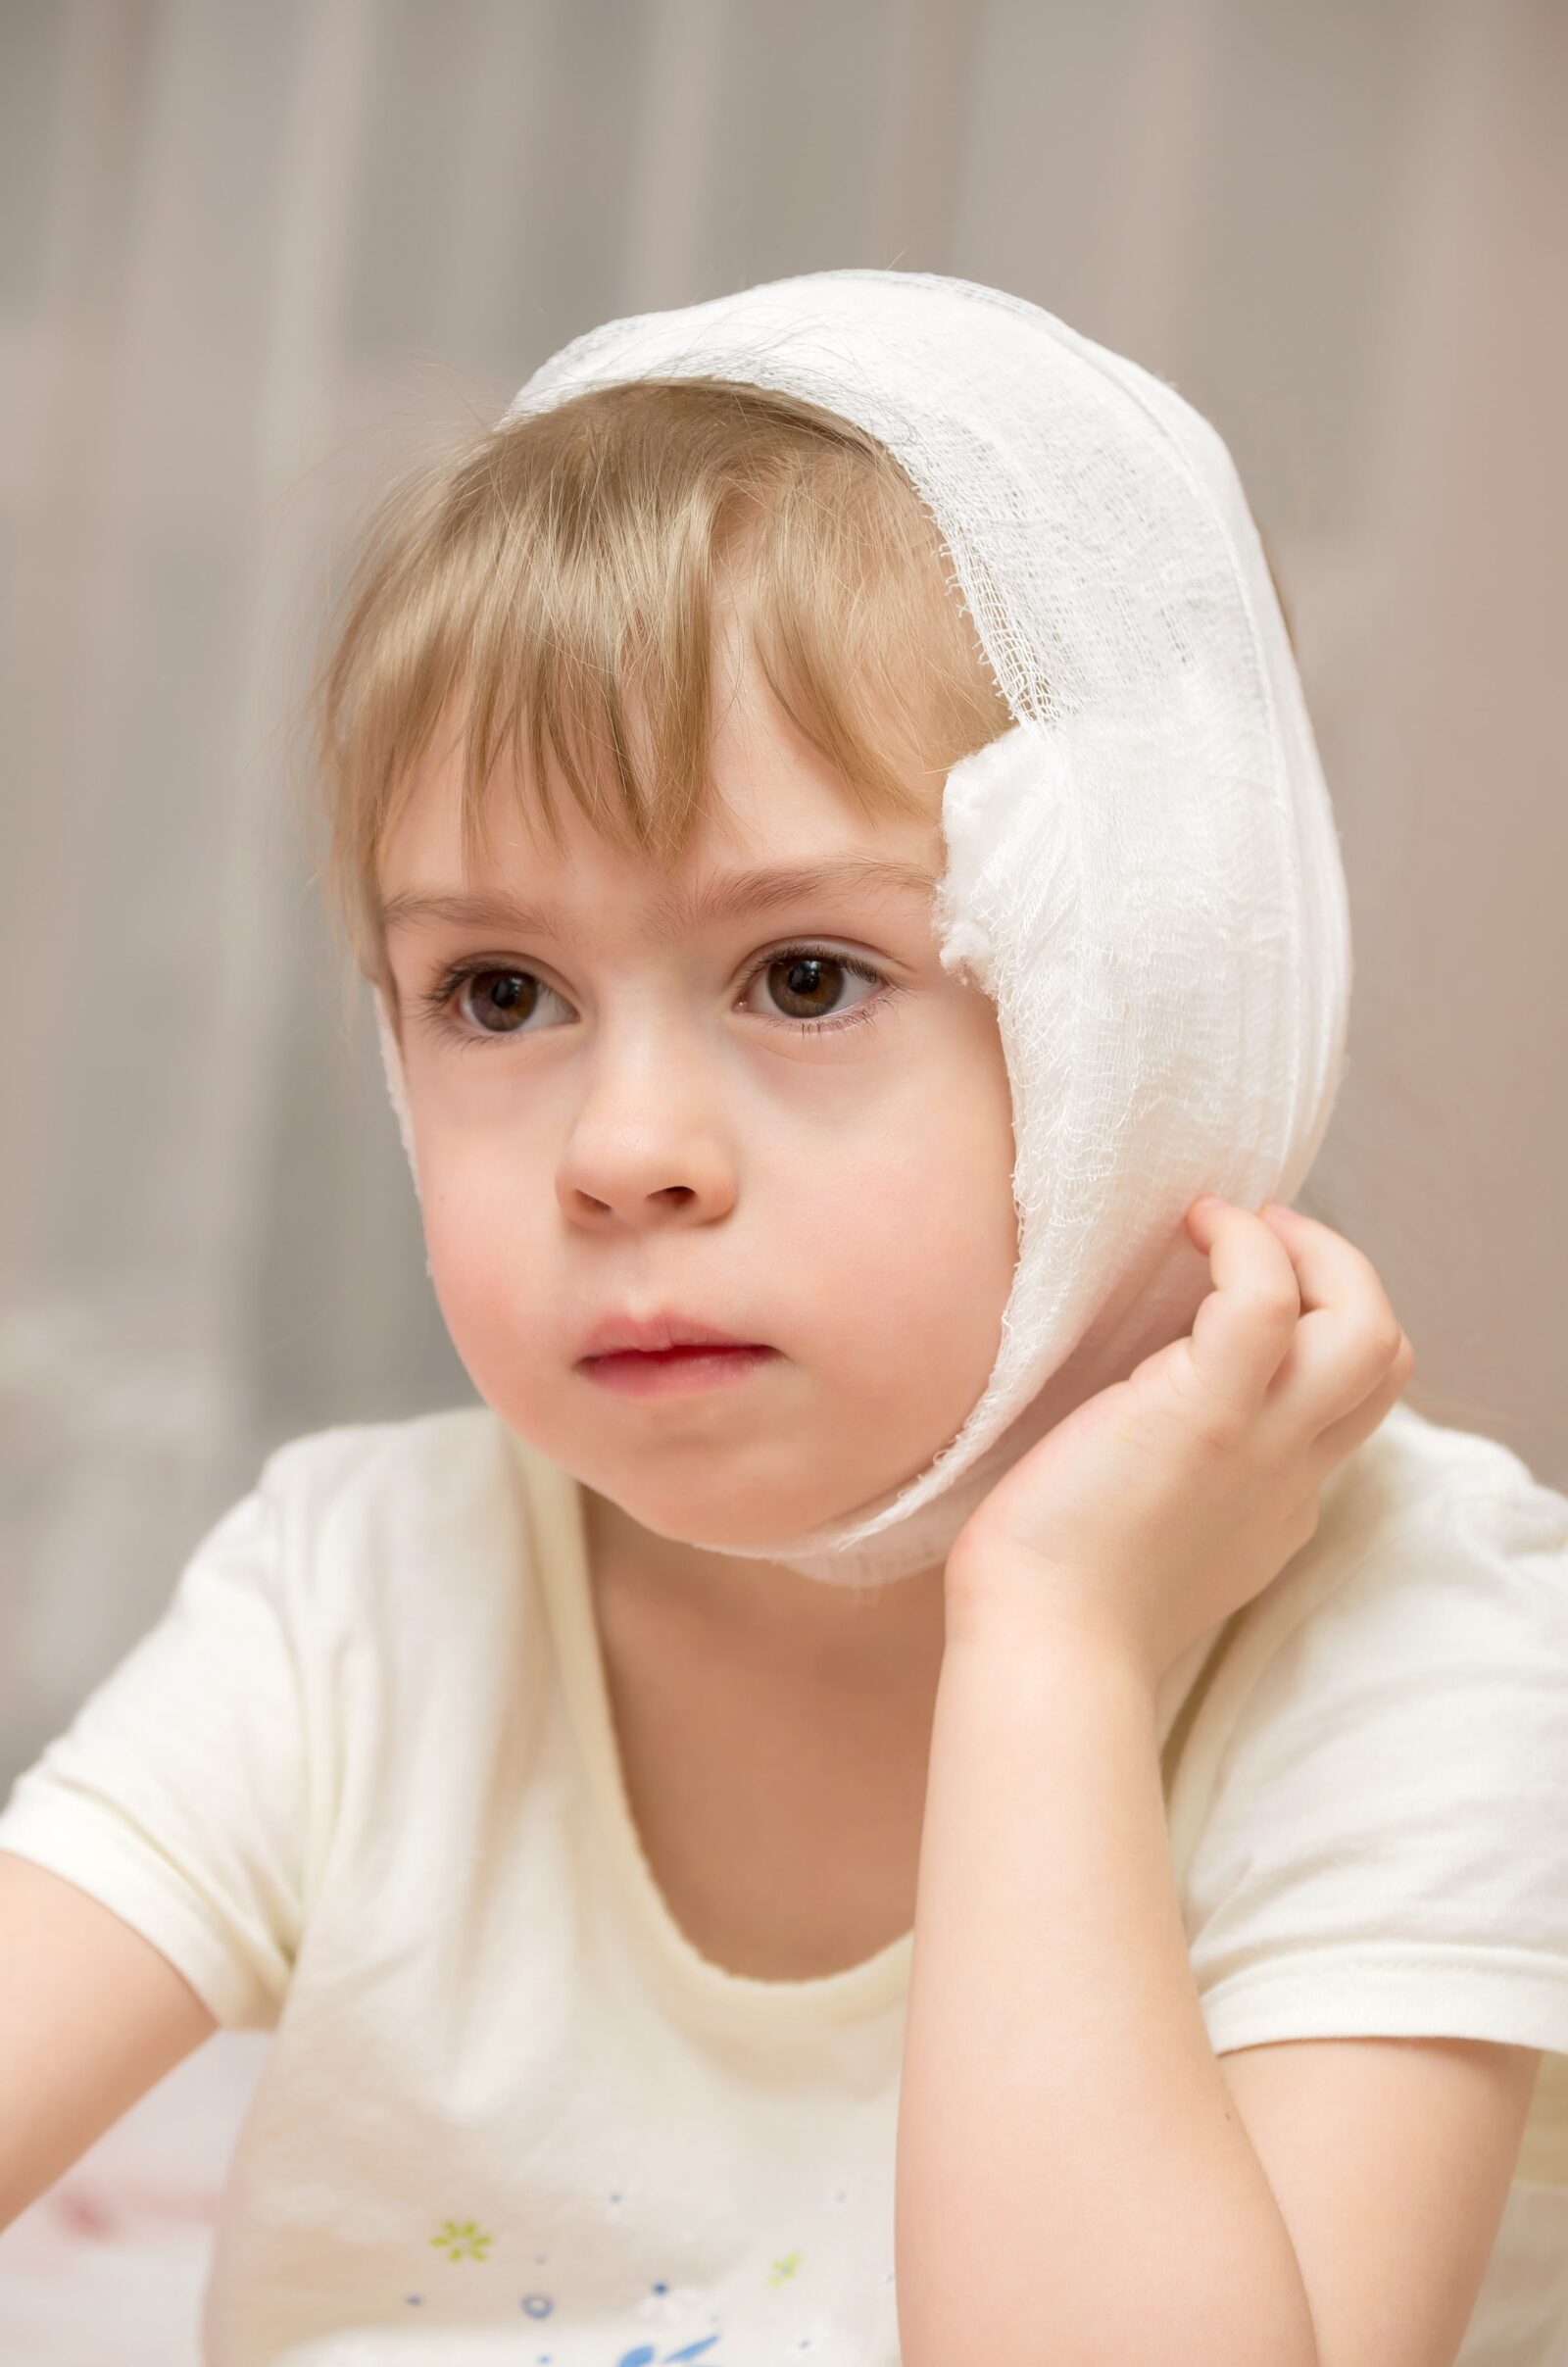 young child with ear bandage